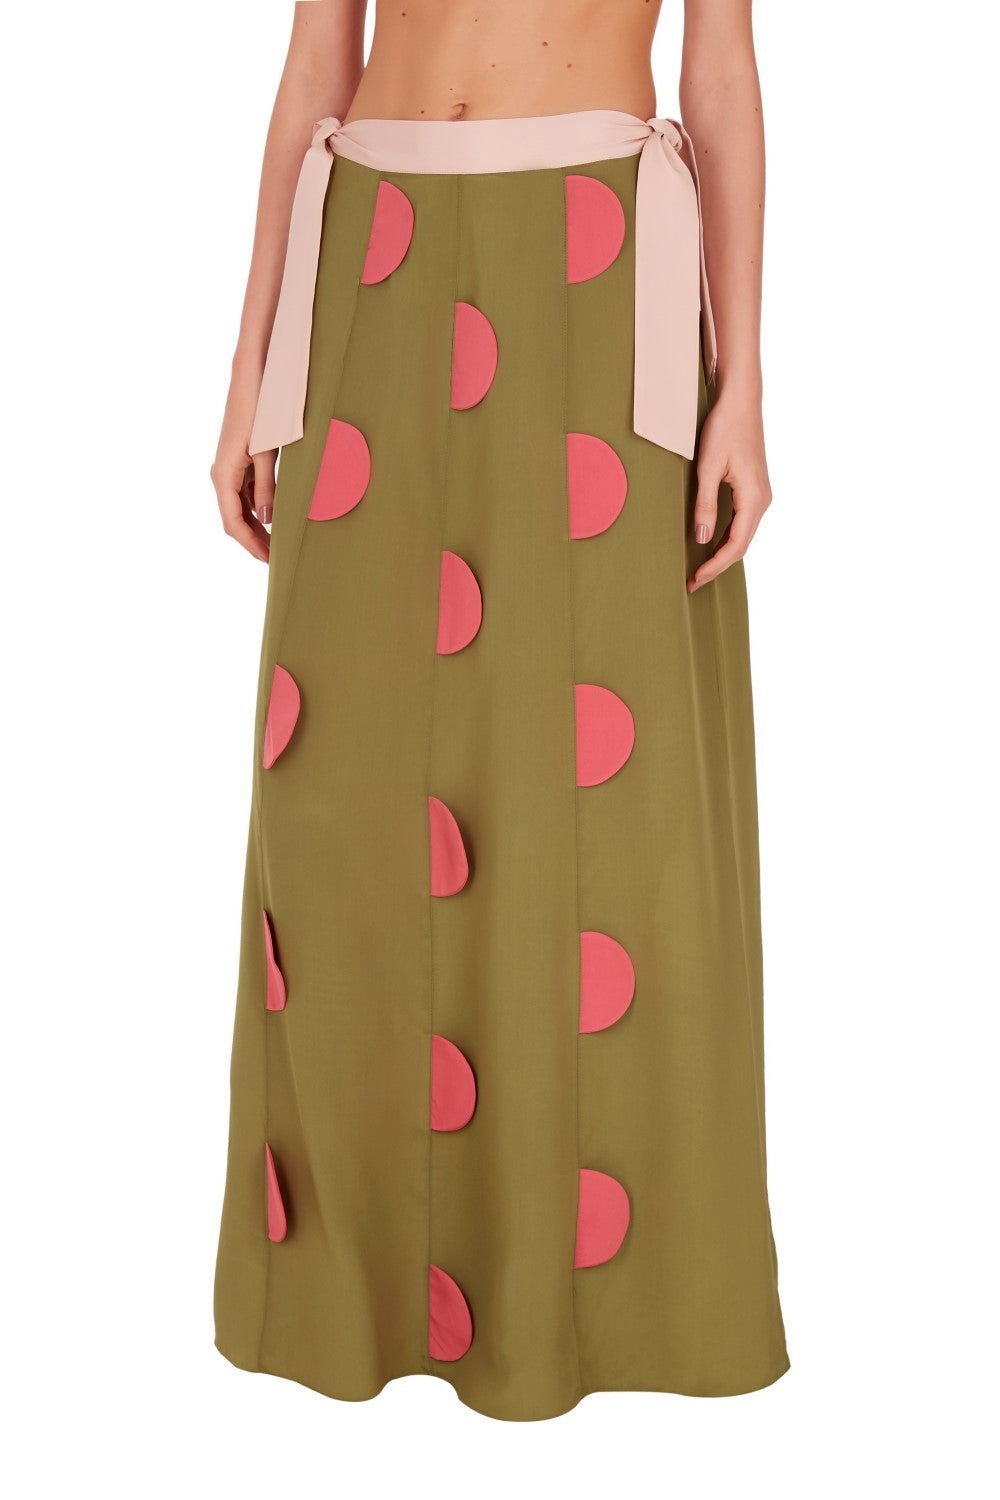 Inspired by the ‘20s Art Deco style, this long skirt features an array of geometric patterns in vintage rose and green